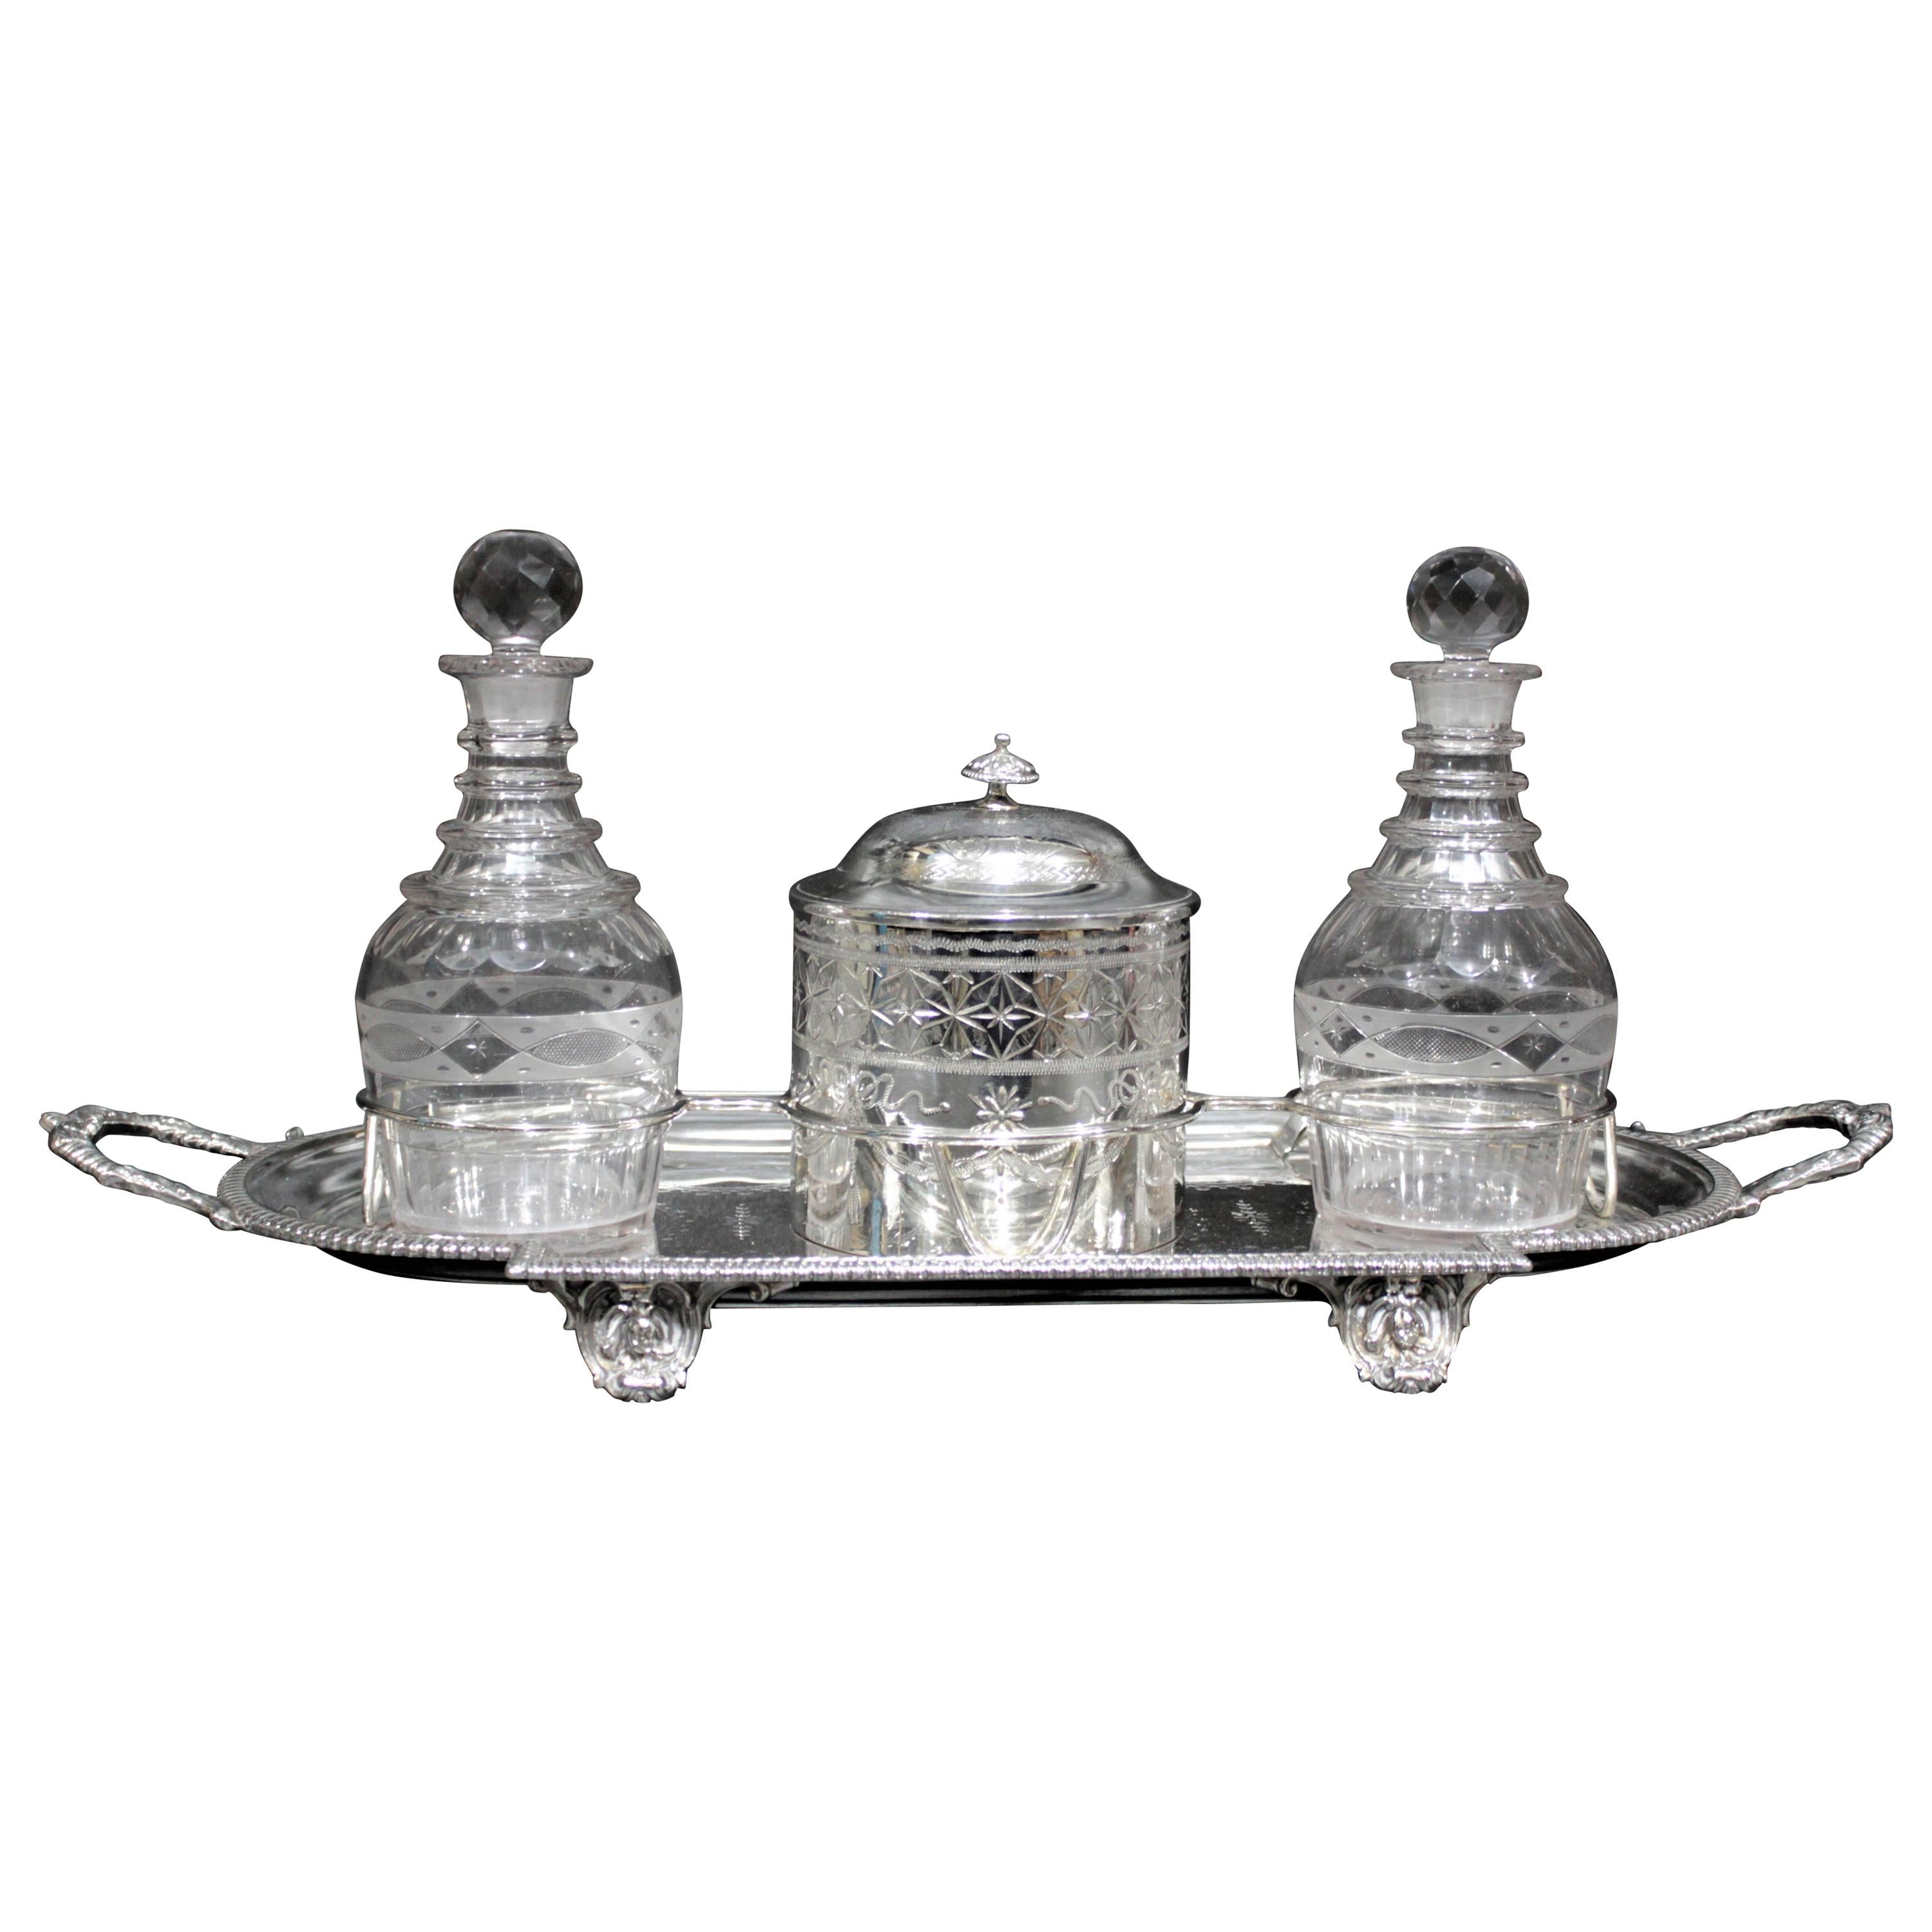 Antique Silver Plated Sherry Stand with Glass Decanters and Biscuit Barrel